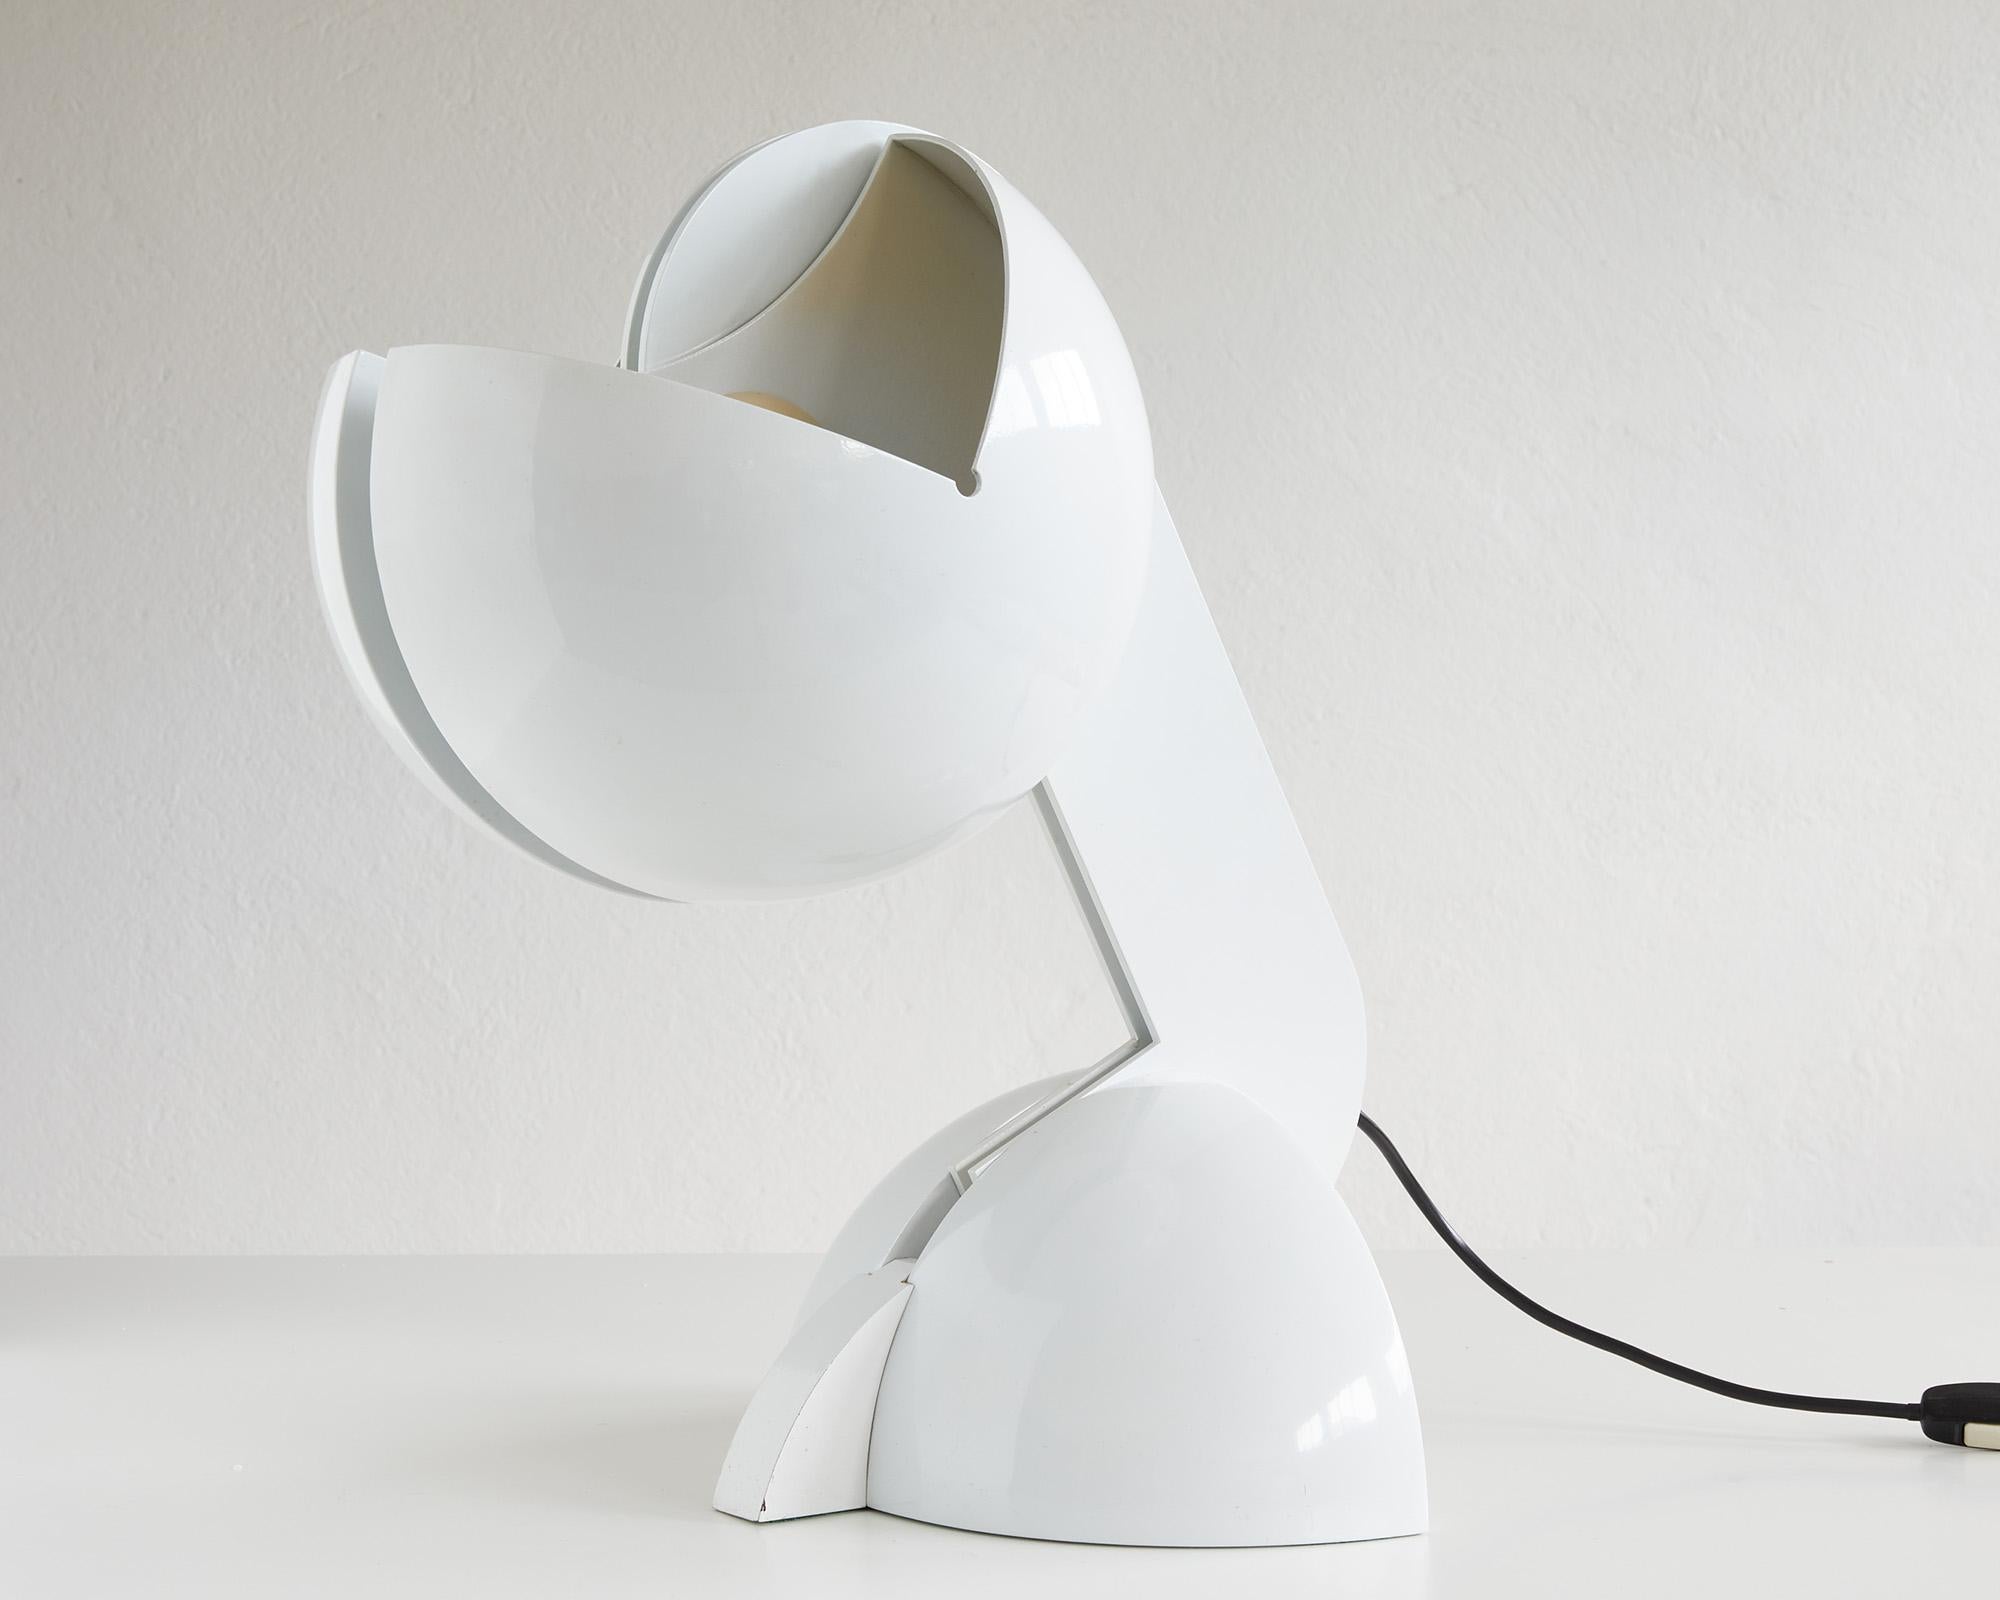 Enameled Ruspa Sculptural Table Lamp by Gae Aulenti for Martinelli Luci, Italy, 1968